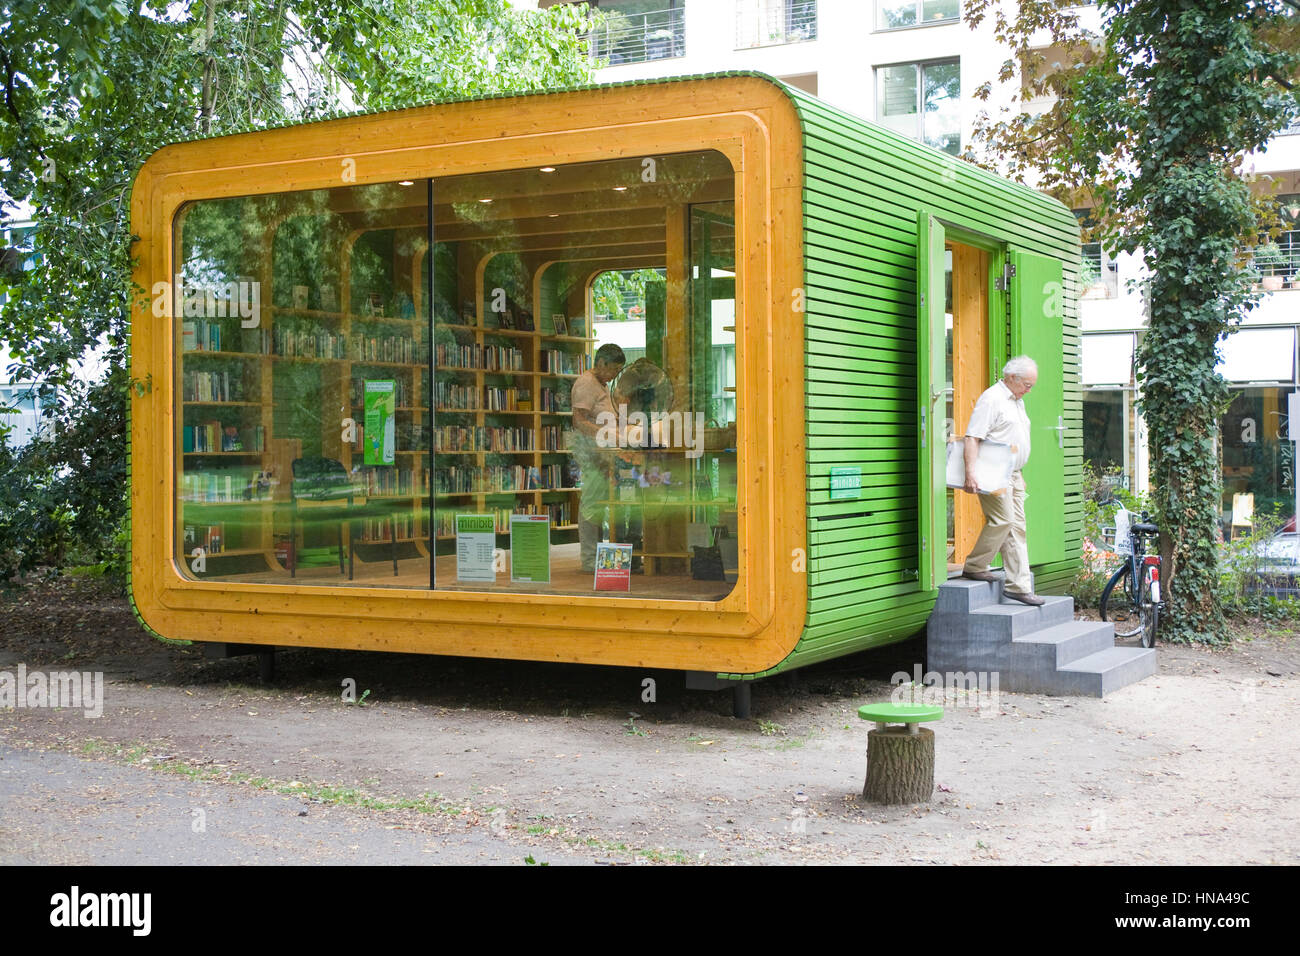 Germany, Cologne, the minibib, kiosk for books to lend for free. No personal datas will be recorded, no library card is needed. Stock Photo